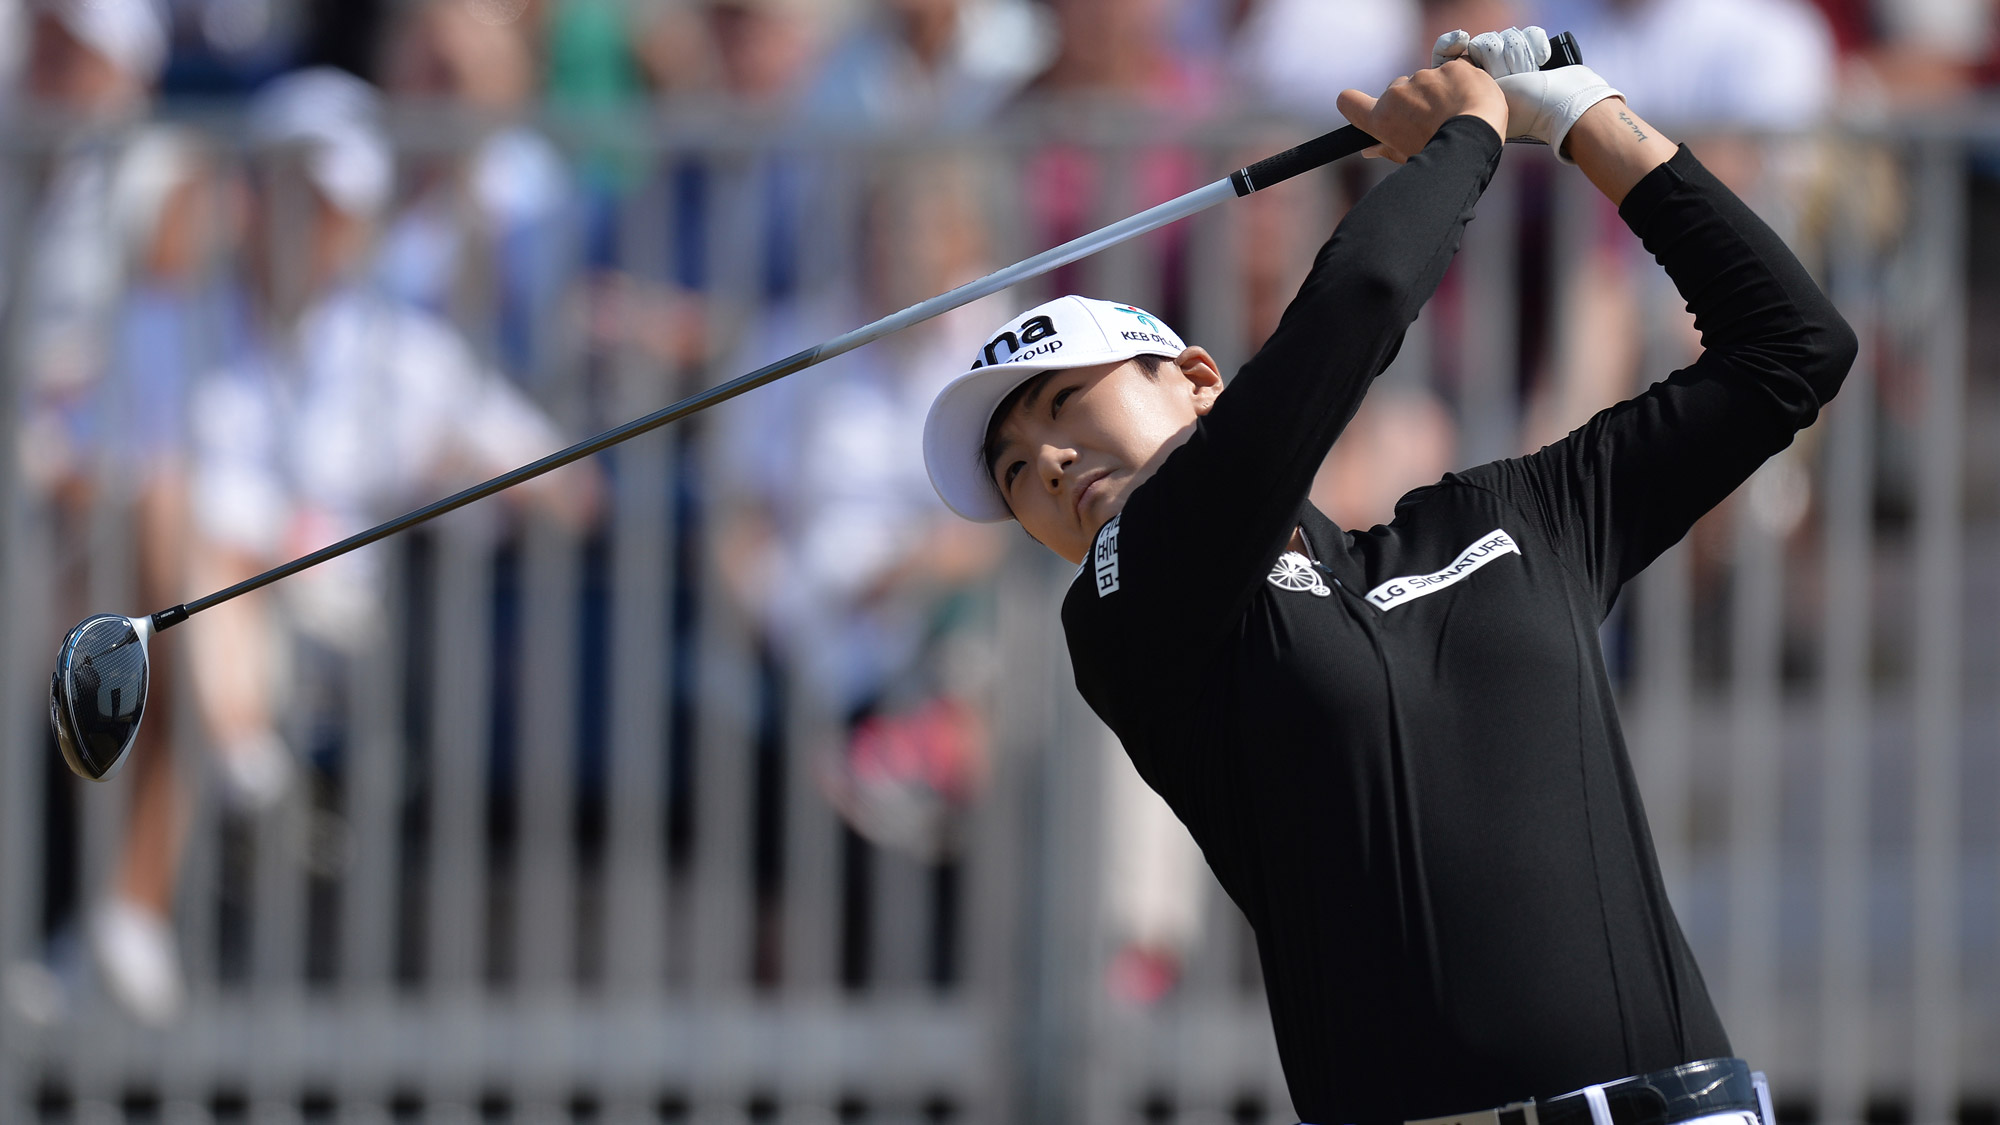 Sung Hyun Park Swings at the Ladies Scottish Open